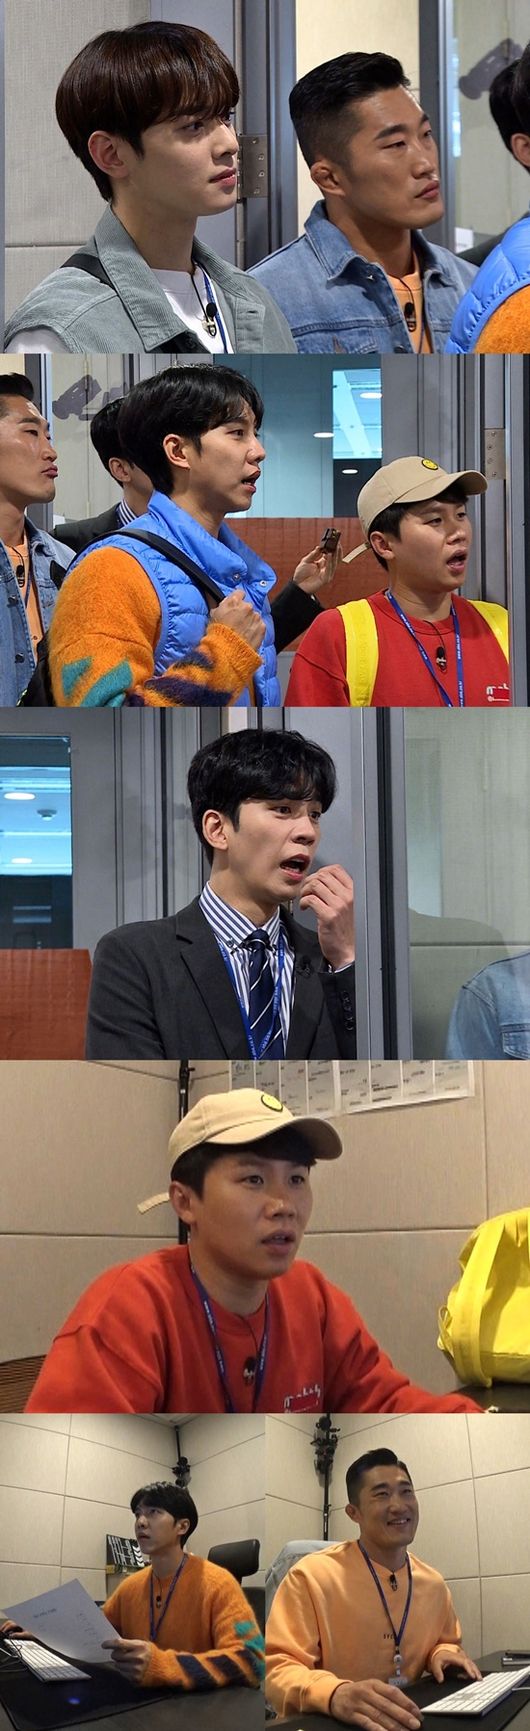 On SBSs All The Butlers, which airs at 6:25 p.m. on the 26th (Sun), Lee Seung-gi, Shin Sung-rok, Yang Se-hyeong, Jung Eun-woo and Kim Dong-Hyuns pretence will be released.Last week, All The Butlers was featured in a 24-hour broadcast station special, and Lee Seung-gi, Shin Sung-rok, Yang Se-hyeong and daily students Jung Eun-woo and Kim Dong-Hyun participated in the production process of I want to know and SBS 8 News.Members will visit the Arts Bureau this time, following the Cultural and Press Bureau.The members are interested in the editing mission ahead of the final interview with the director of the entertainment department, which is the final stage of the interview with SBS new employees at the entertainment department.Mission is to participate directly in editing the opening video of All The Butlers.Kim Dong-Hyun and Jung Eun-woo, who are thoroughly self-centered editing from Lee Seung-gi, who has come to the scene in a terrible situation, will be released.In particular, Yang Se-hyeong listened to his comment while editing and said, Yang Se-hyeong! Do not say anything.) I was laughing because I reflected on myself. In addition, CP, who watched Kim Dong-Hyuns edited video, praised him for saying, I thought I was breathing.On the other hand, the broadcast is expected to show all the vivid scenes of Top Model members on live broadcasts of SBS 8 News, including sports news and radio broadcasting.The edited video full of the members abilities can be found on SBS All The Butlers, which is broadcasted at 6:25 pm on the 26th (Sunday).SBS